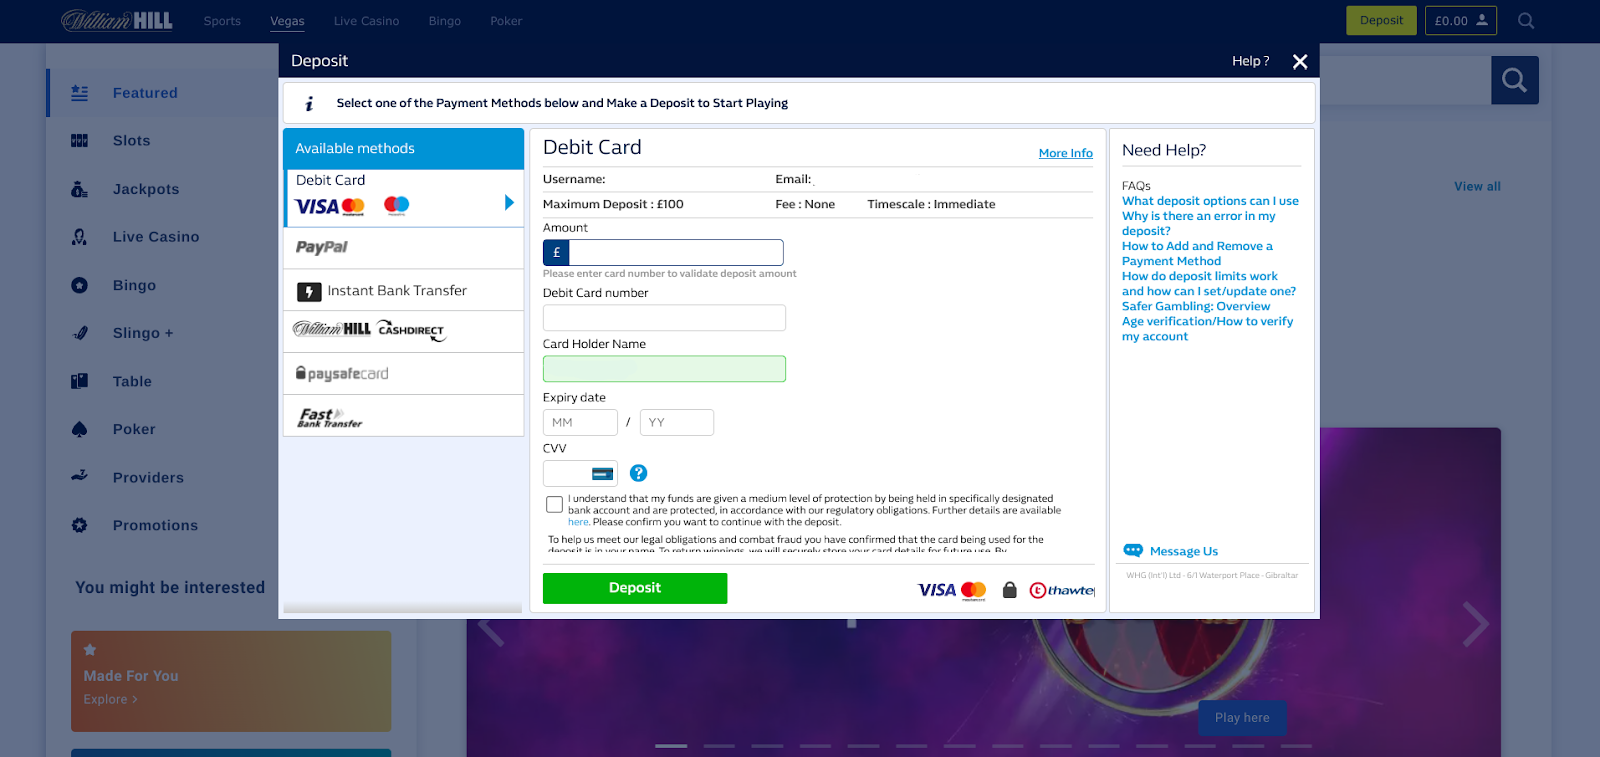 Select the payment method that you wish to use and enter your payment details